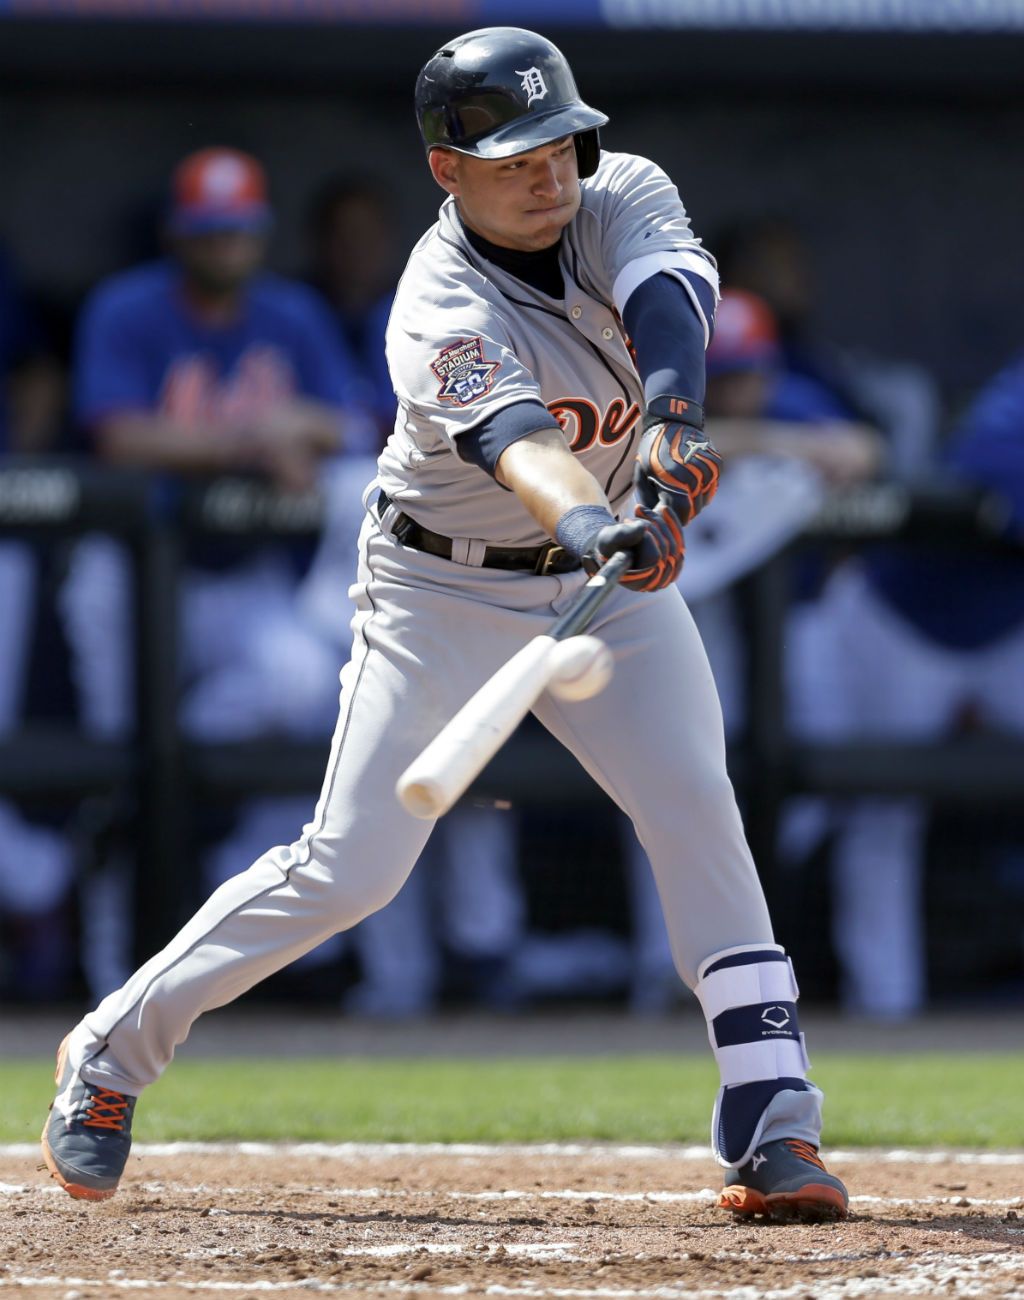 Tigers' SS Jose Iglesias has stress fractures in both legs